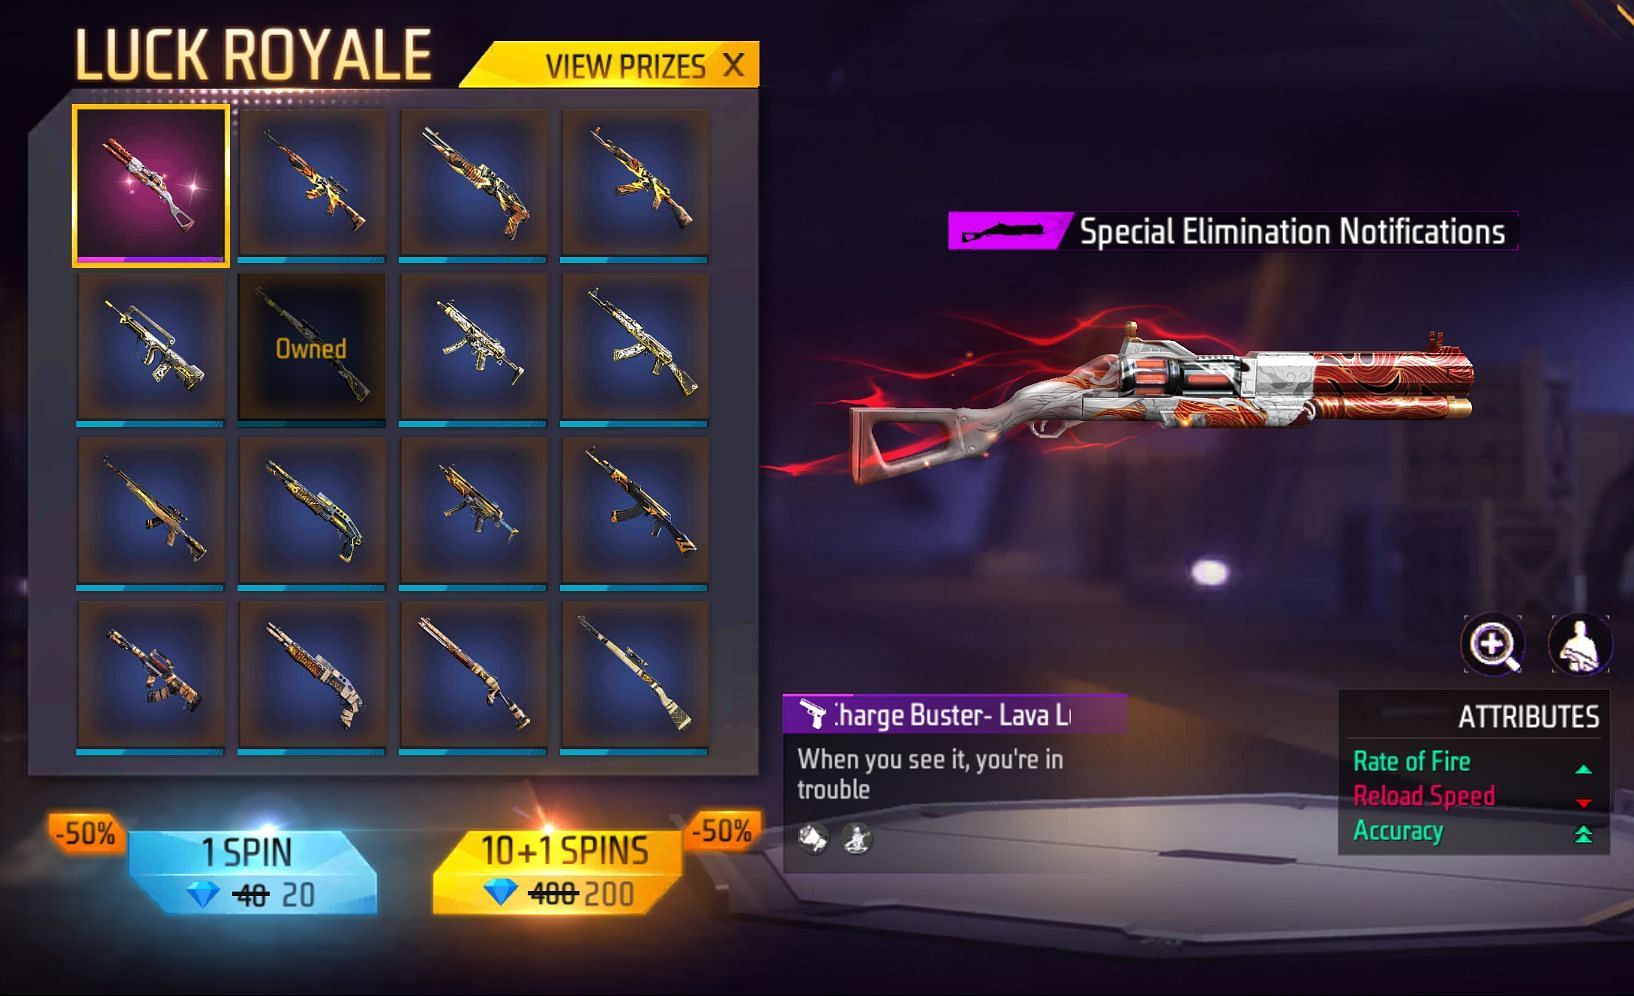 The available items in this Luck Royale (Image via Garena)